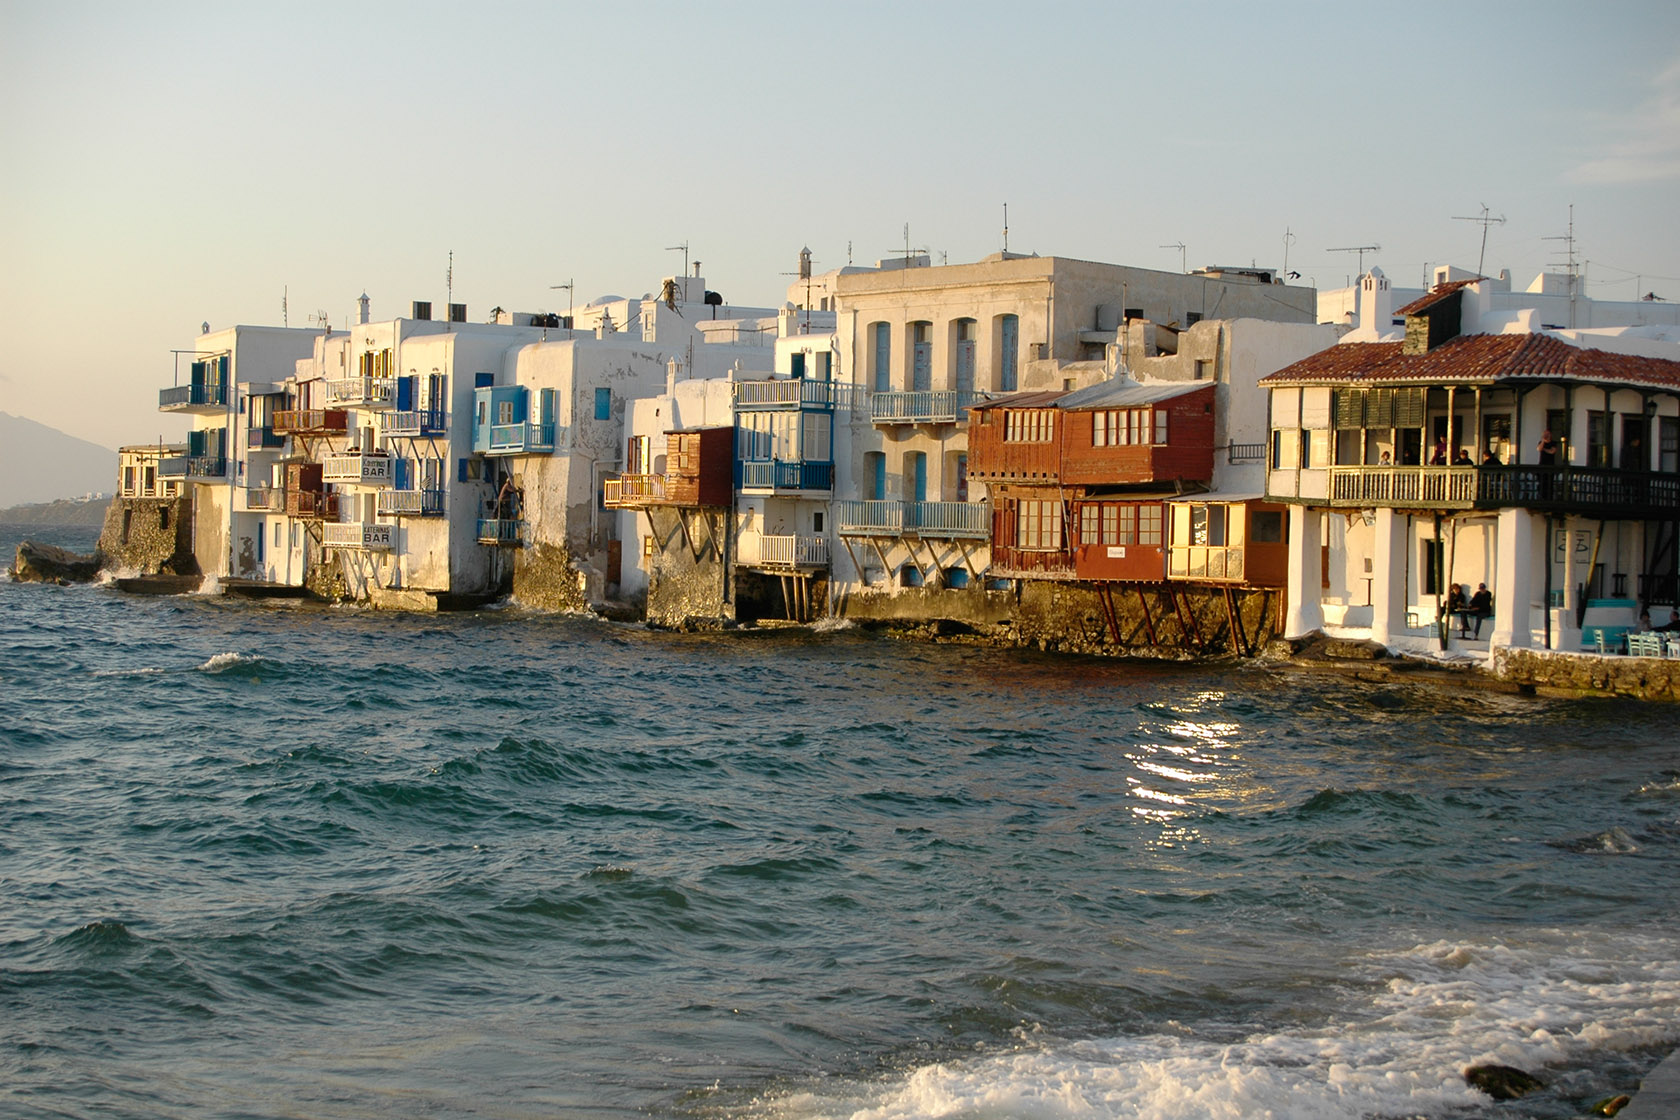 The Mykonos waterfront in the evening light, JPEG image file  without adjutsments except size